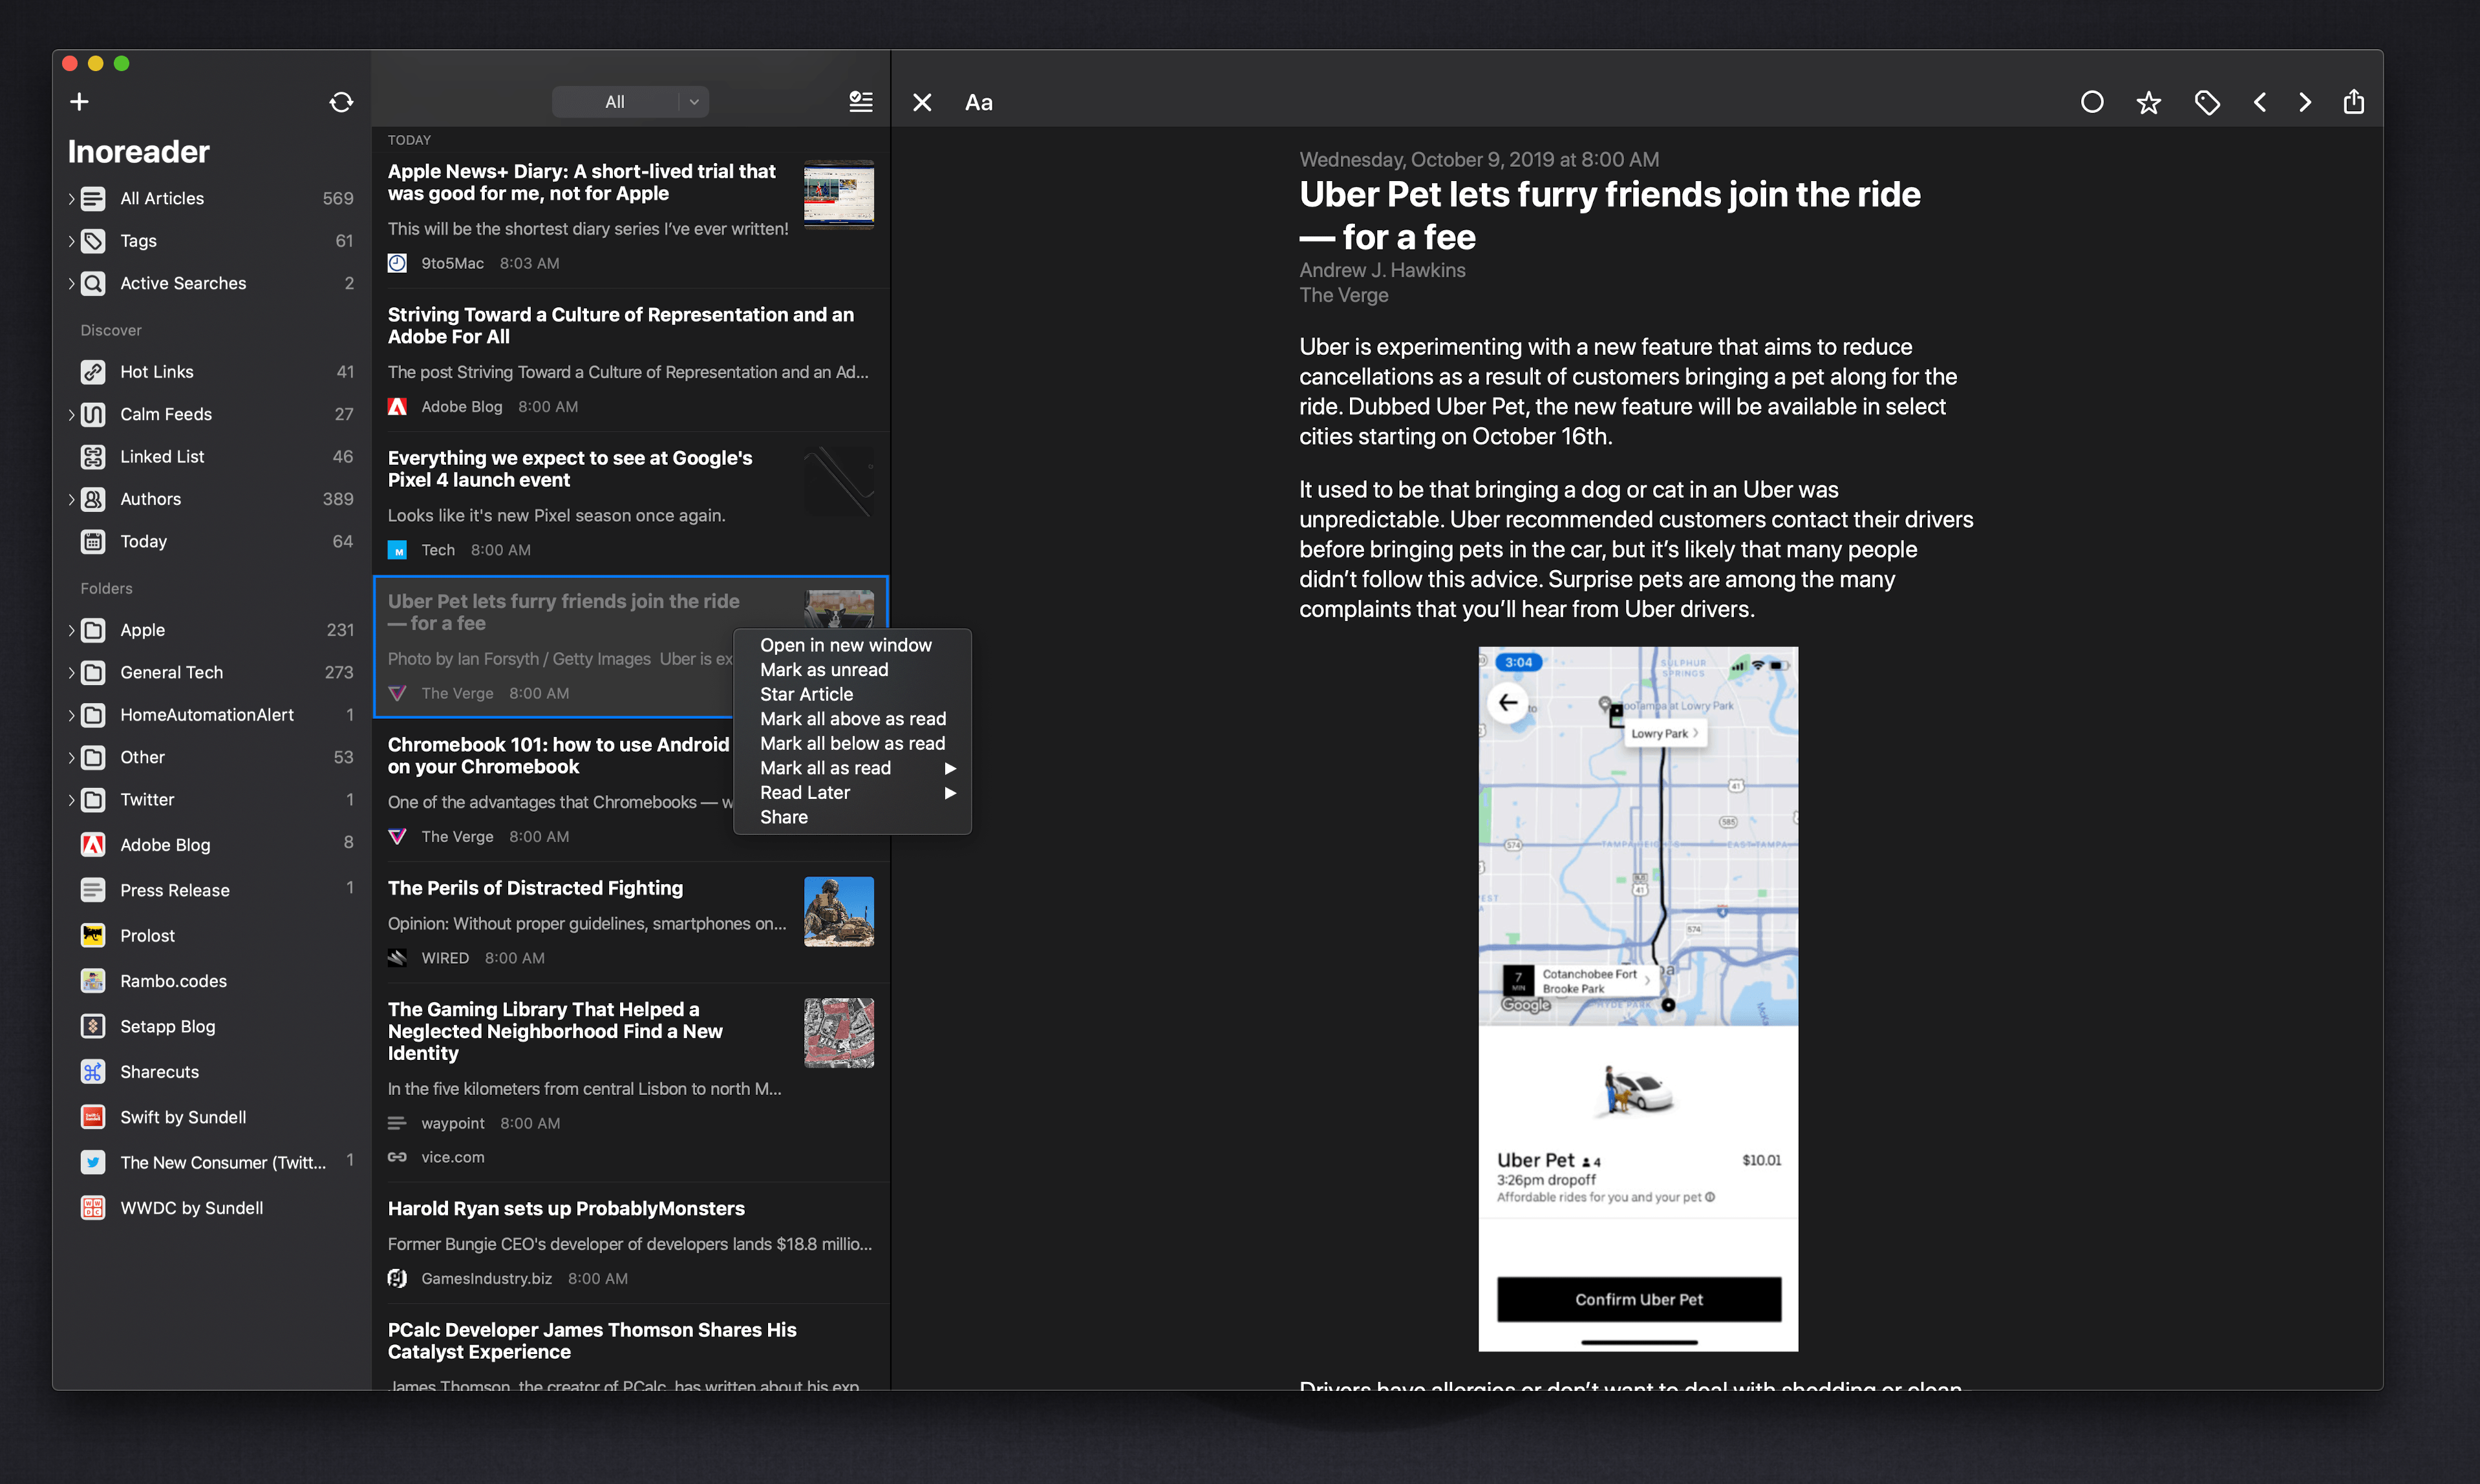 lire makes extensive use of context menus throughout.